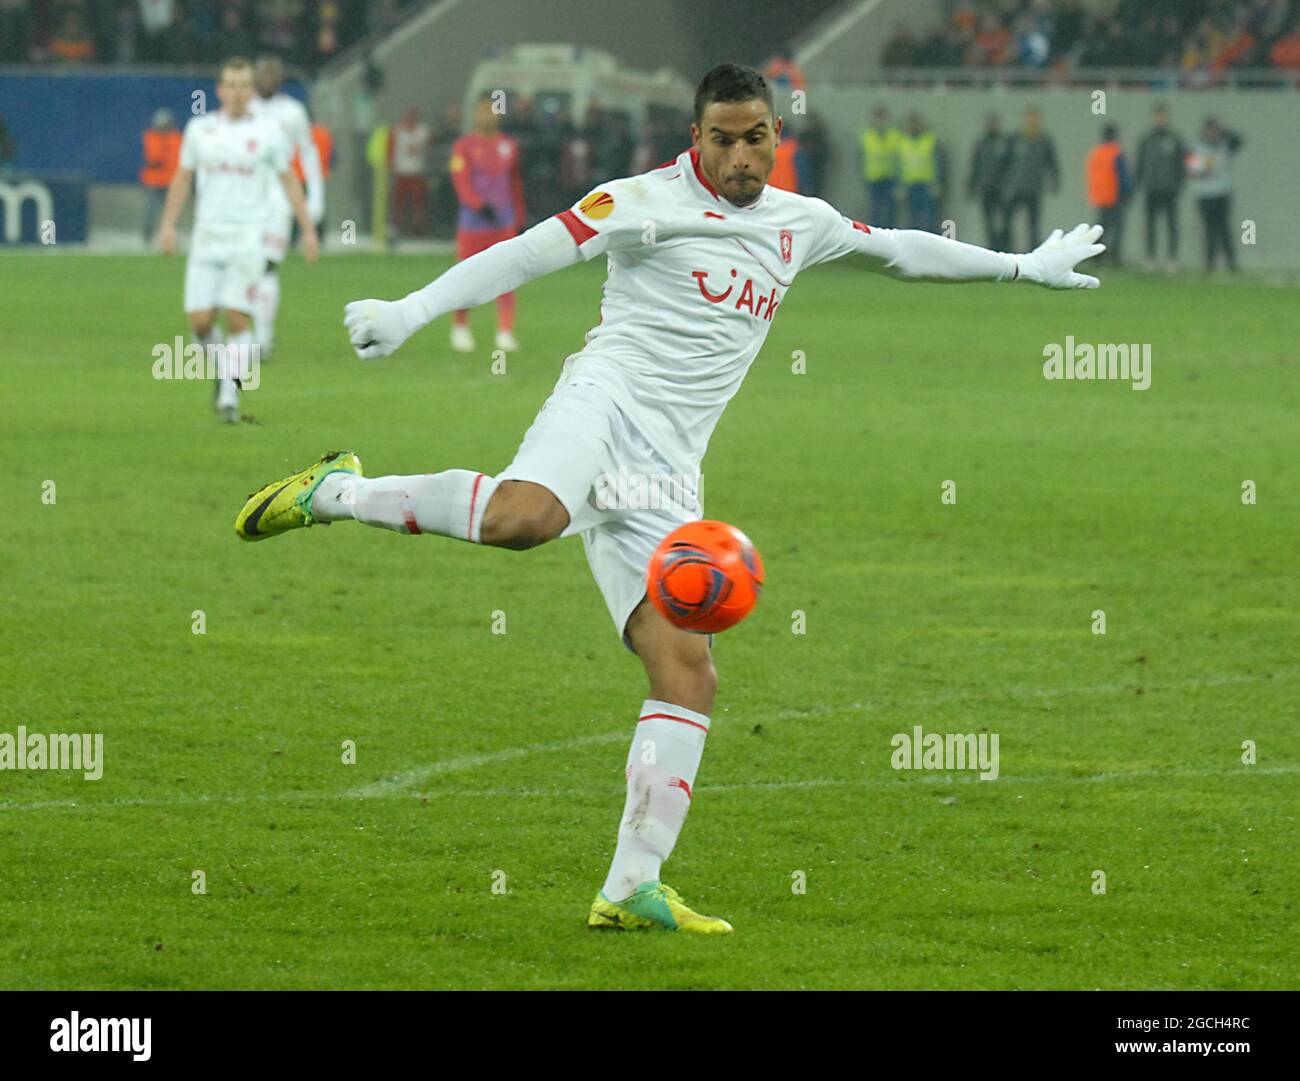 BUCHAREST, ROMANIA - FEBRUARY 16, 2012: Nacer Chadli of Twente pictured in action during the first leg of the 2011/12 UEFA Europa League Round of 32 game between FCSB and FC Twente at National Arena. Stock Photo